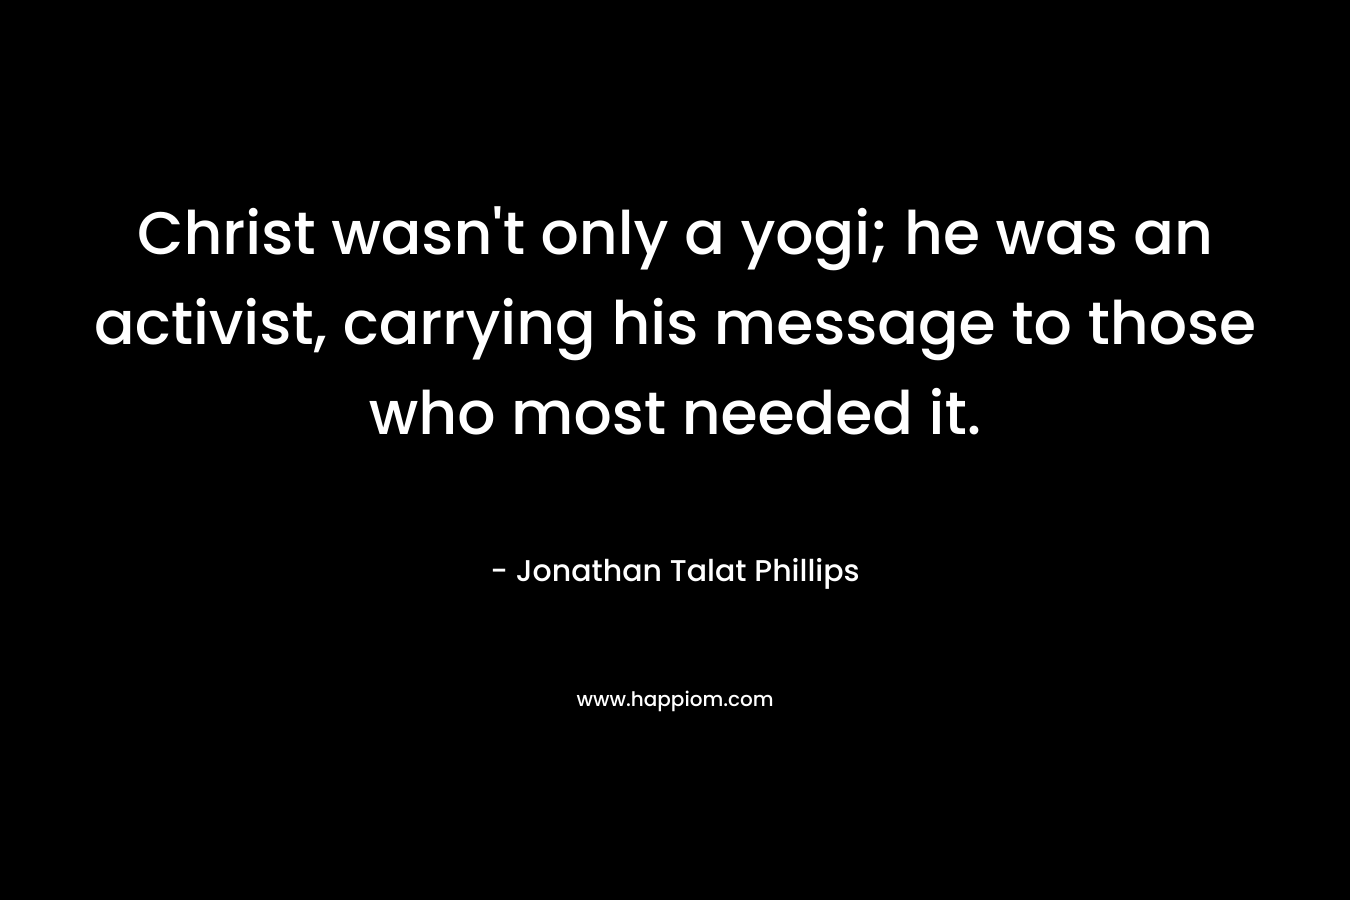 Christ wasn’t only a yogi; he was an activist, carrying his message to those who most needed it. – Jonathan Talat Phillips